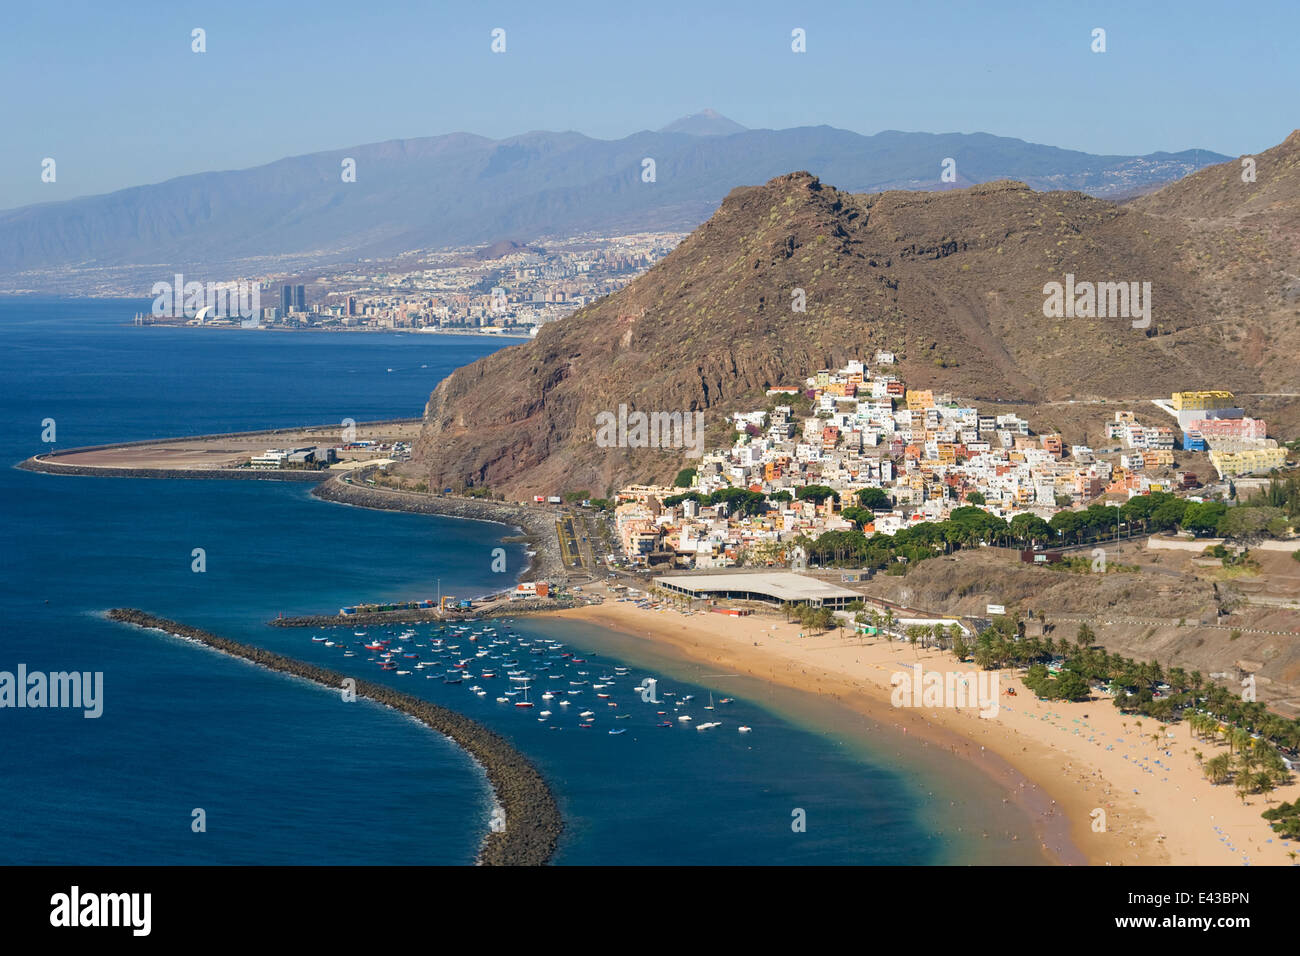 Village of San Andres with the city Santa Cruz in the background, Tenerife, Canary Islands. Stock Photo